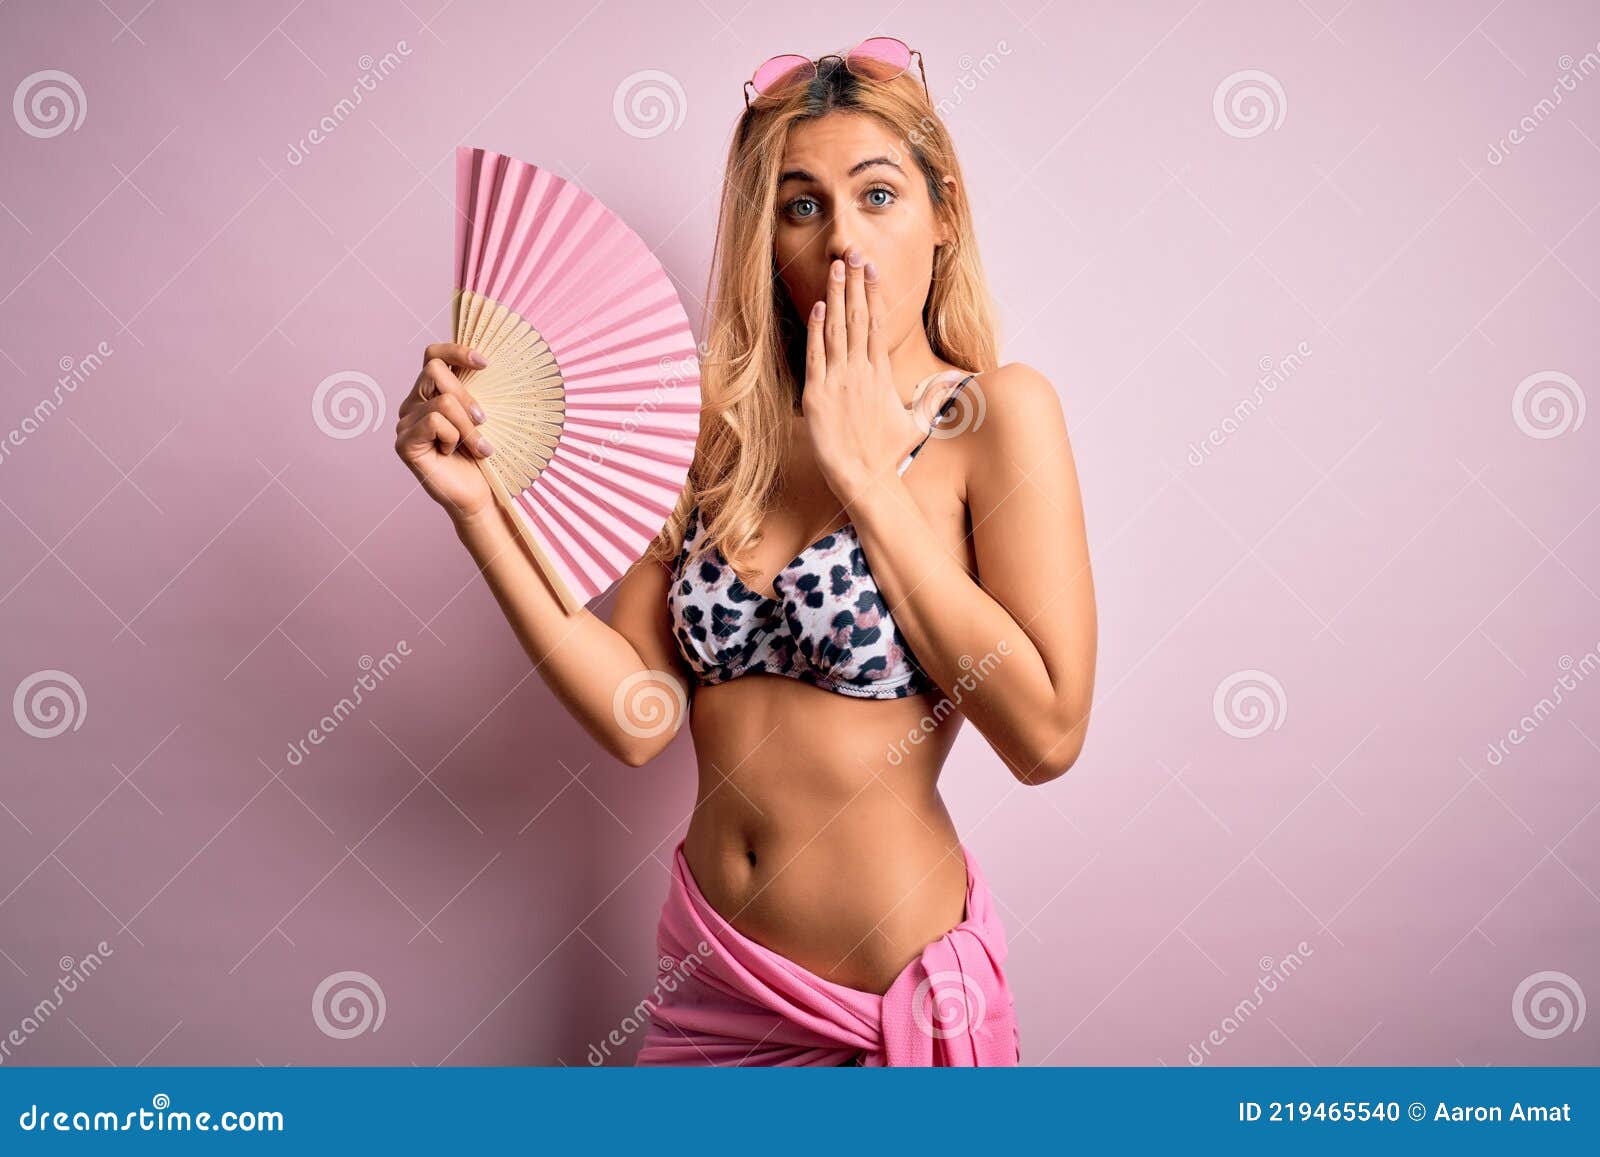 Sexy woman play with glass fan pic